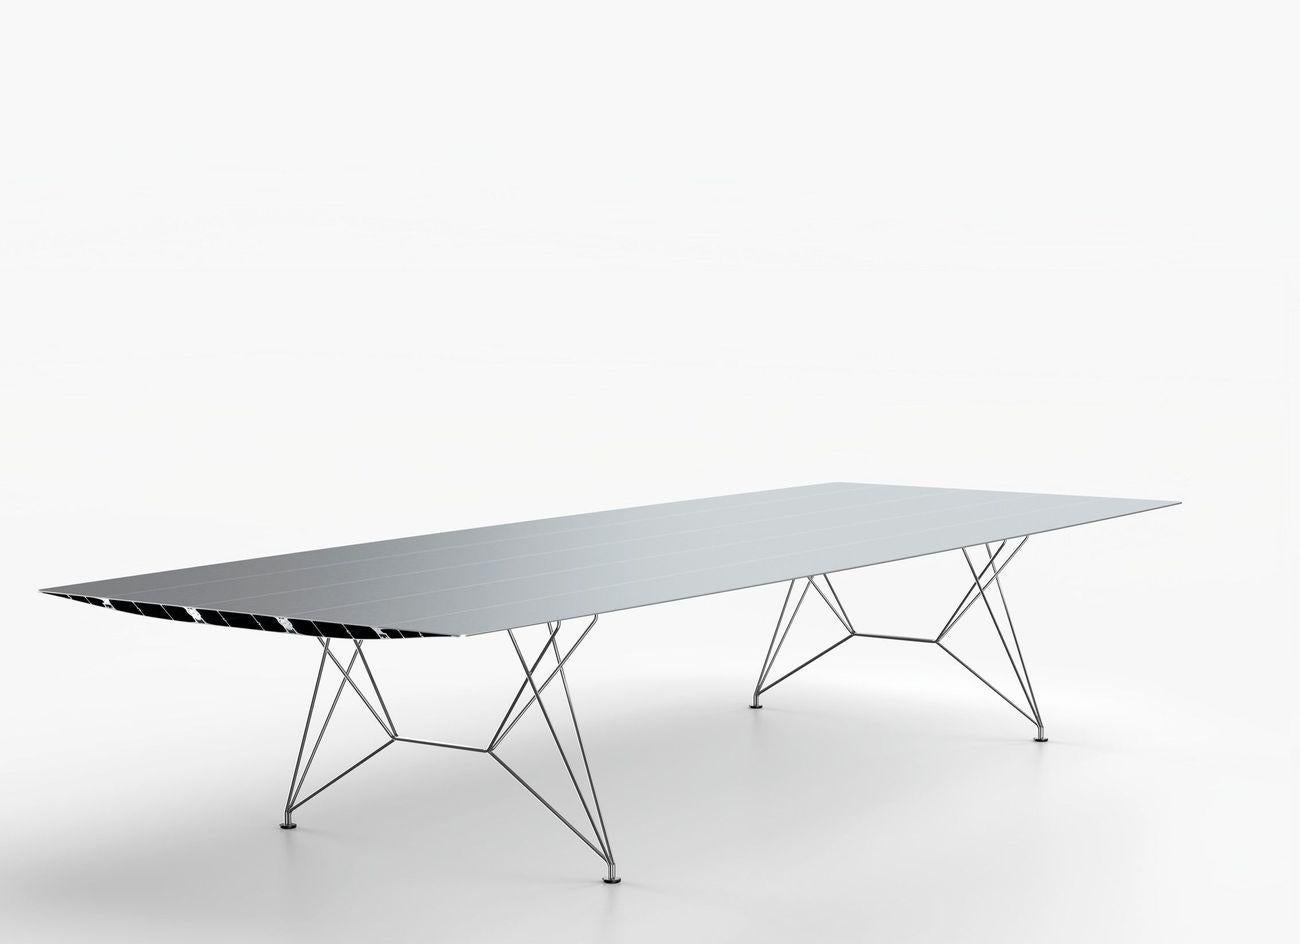 Big stainless steel table B by Konstantin Grcic
Dimensions: D 150 x W 300 x H 74 cm 
Materials: Tabletop in extrusioned aluminium with open ends cut at 45º. There is the option of the surface being laminated in a natural oak effect with a